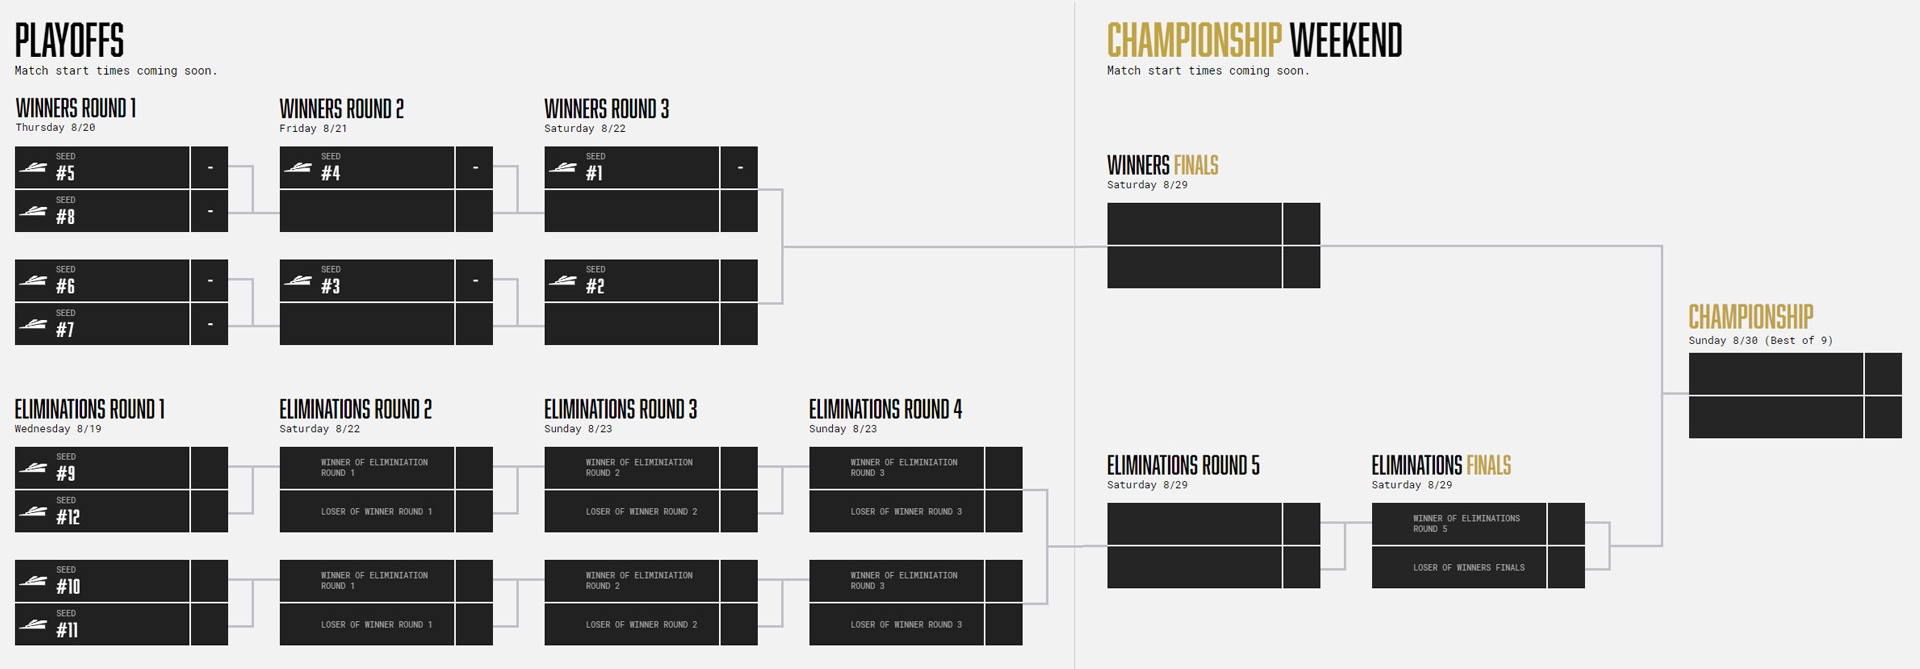 2020 Call of Duty League Playoffs and Championship Weekend Details